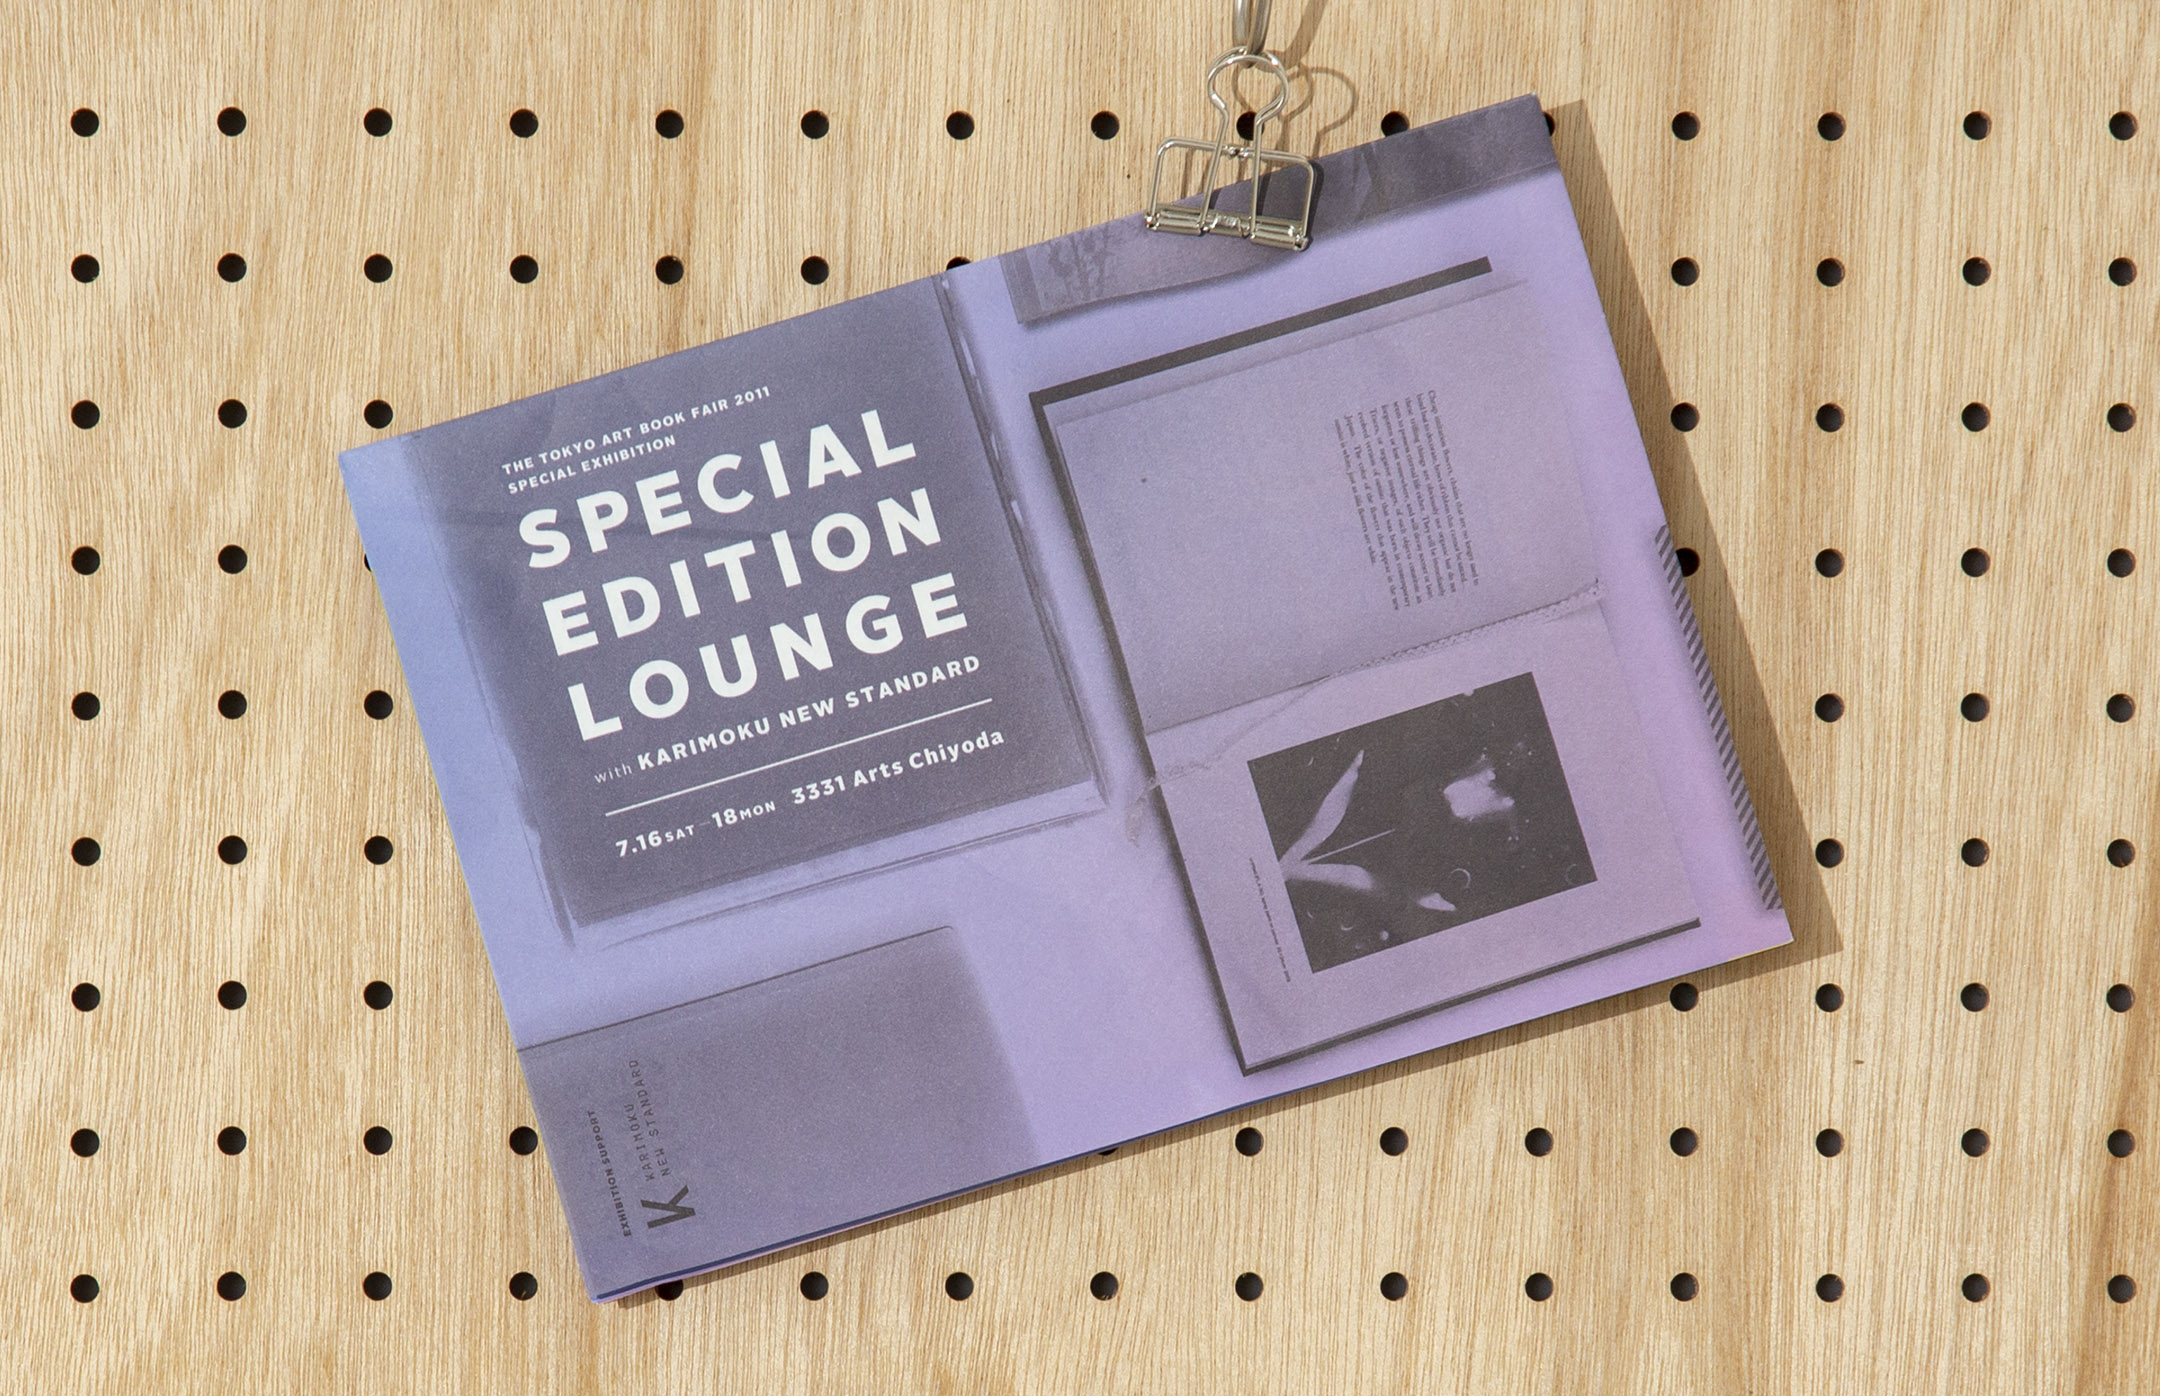 SPECIAL EDITION LOUNGE with KARIMOKU NEW STANDARD